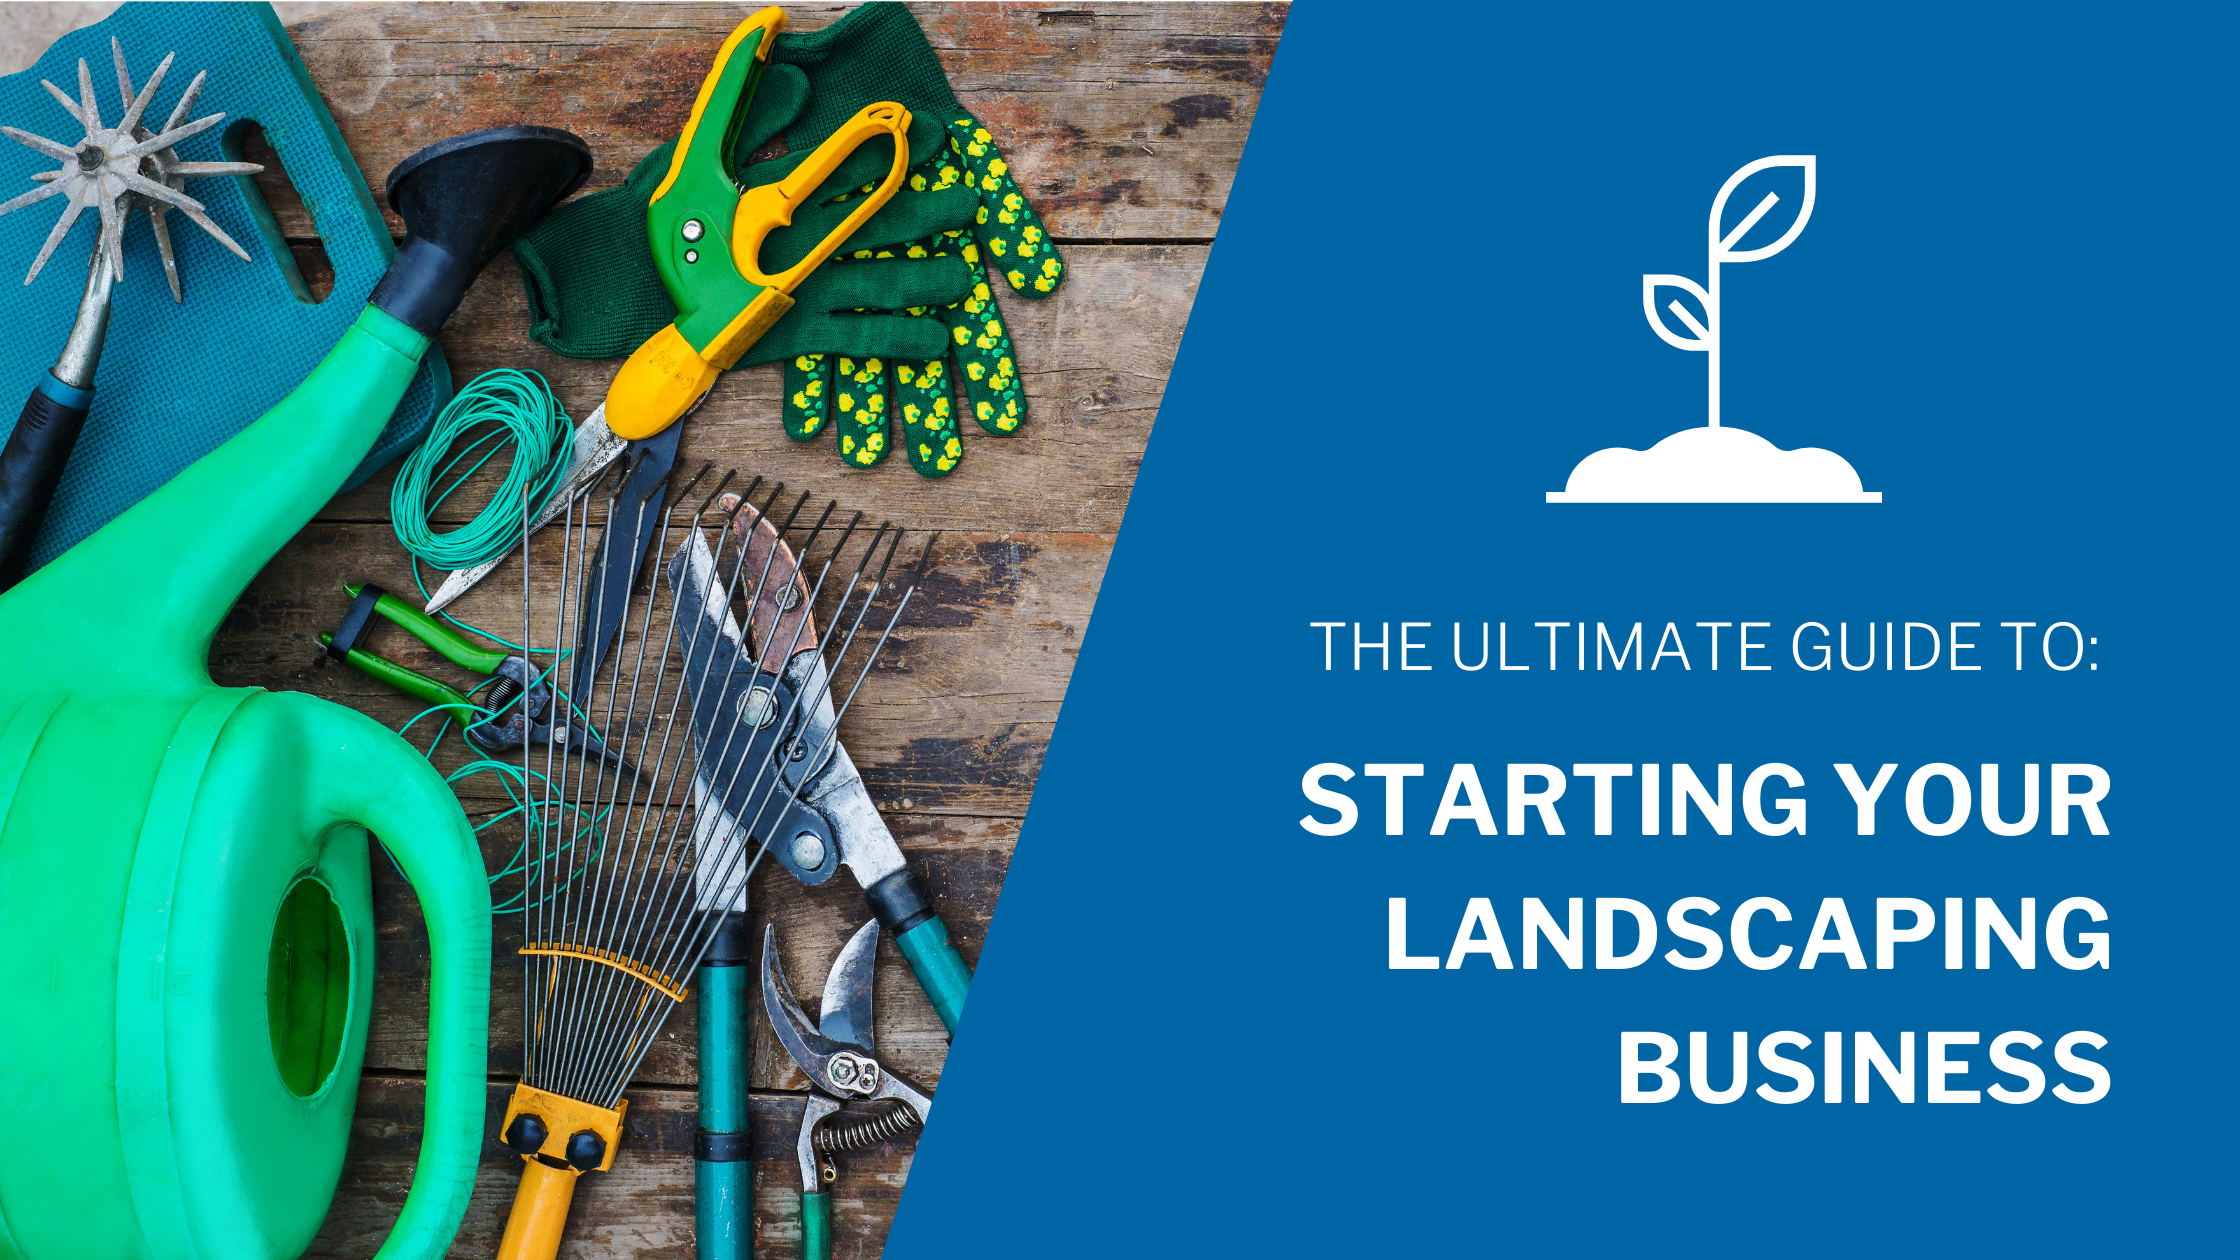 The Ultimate Guide To Starting Your Landscaping Business